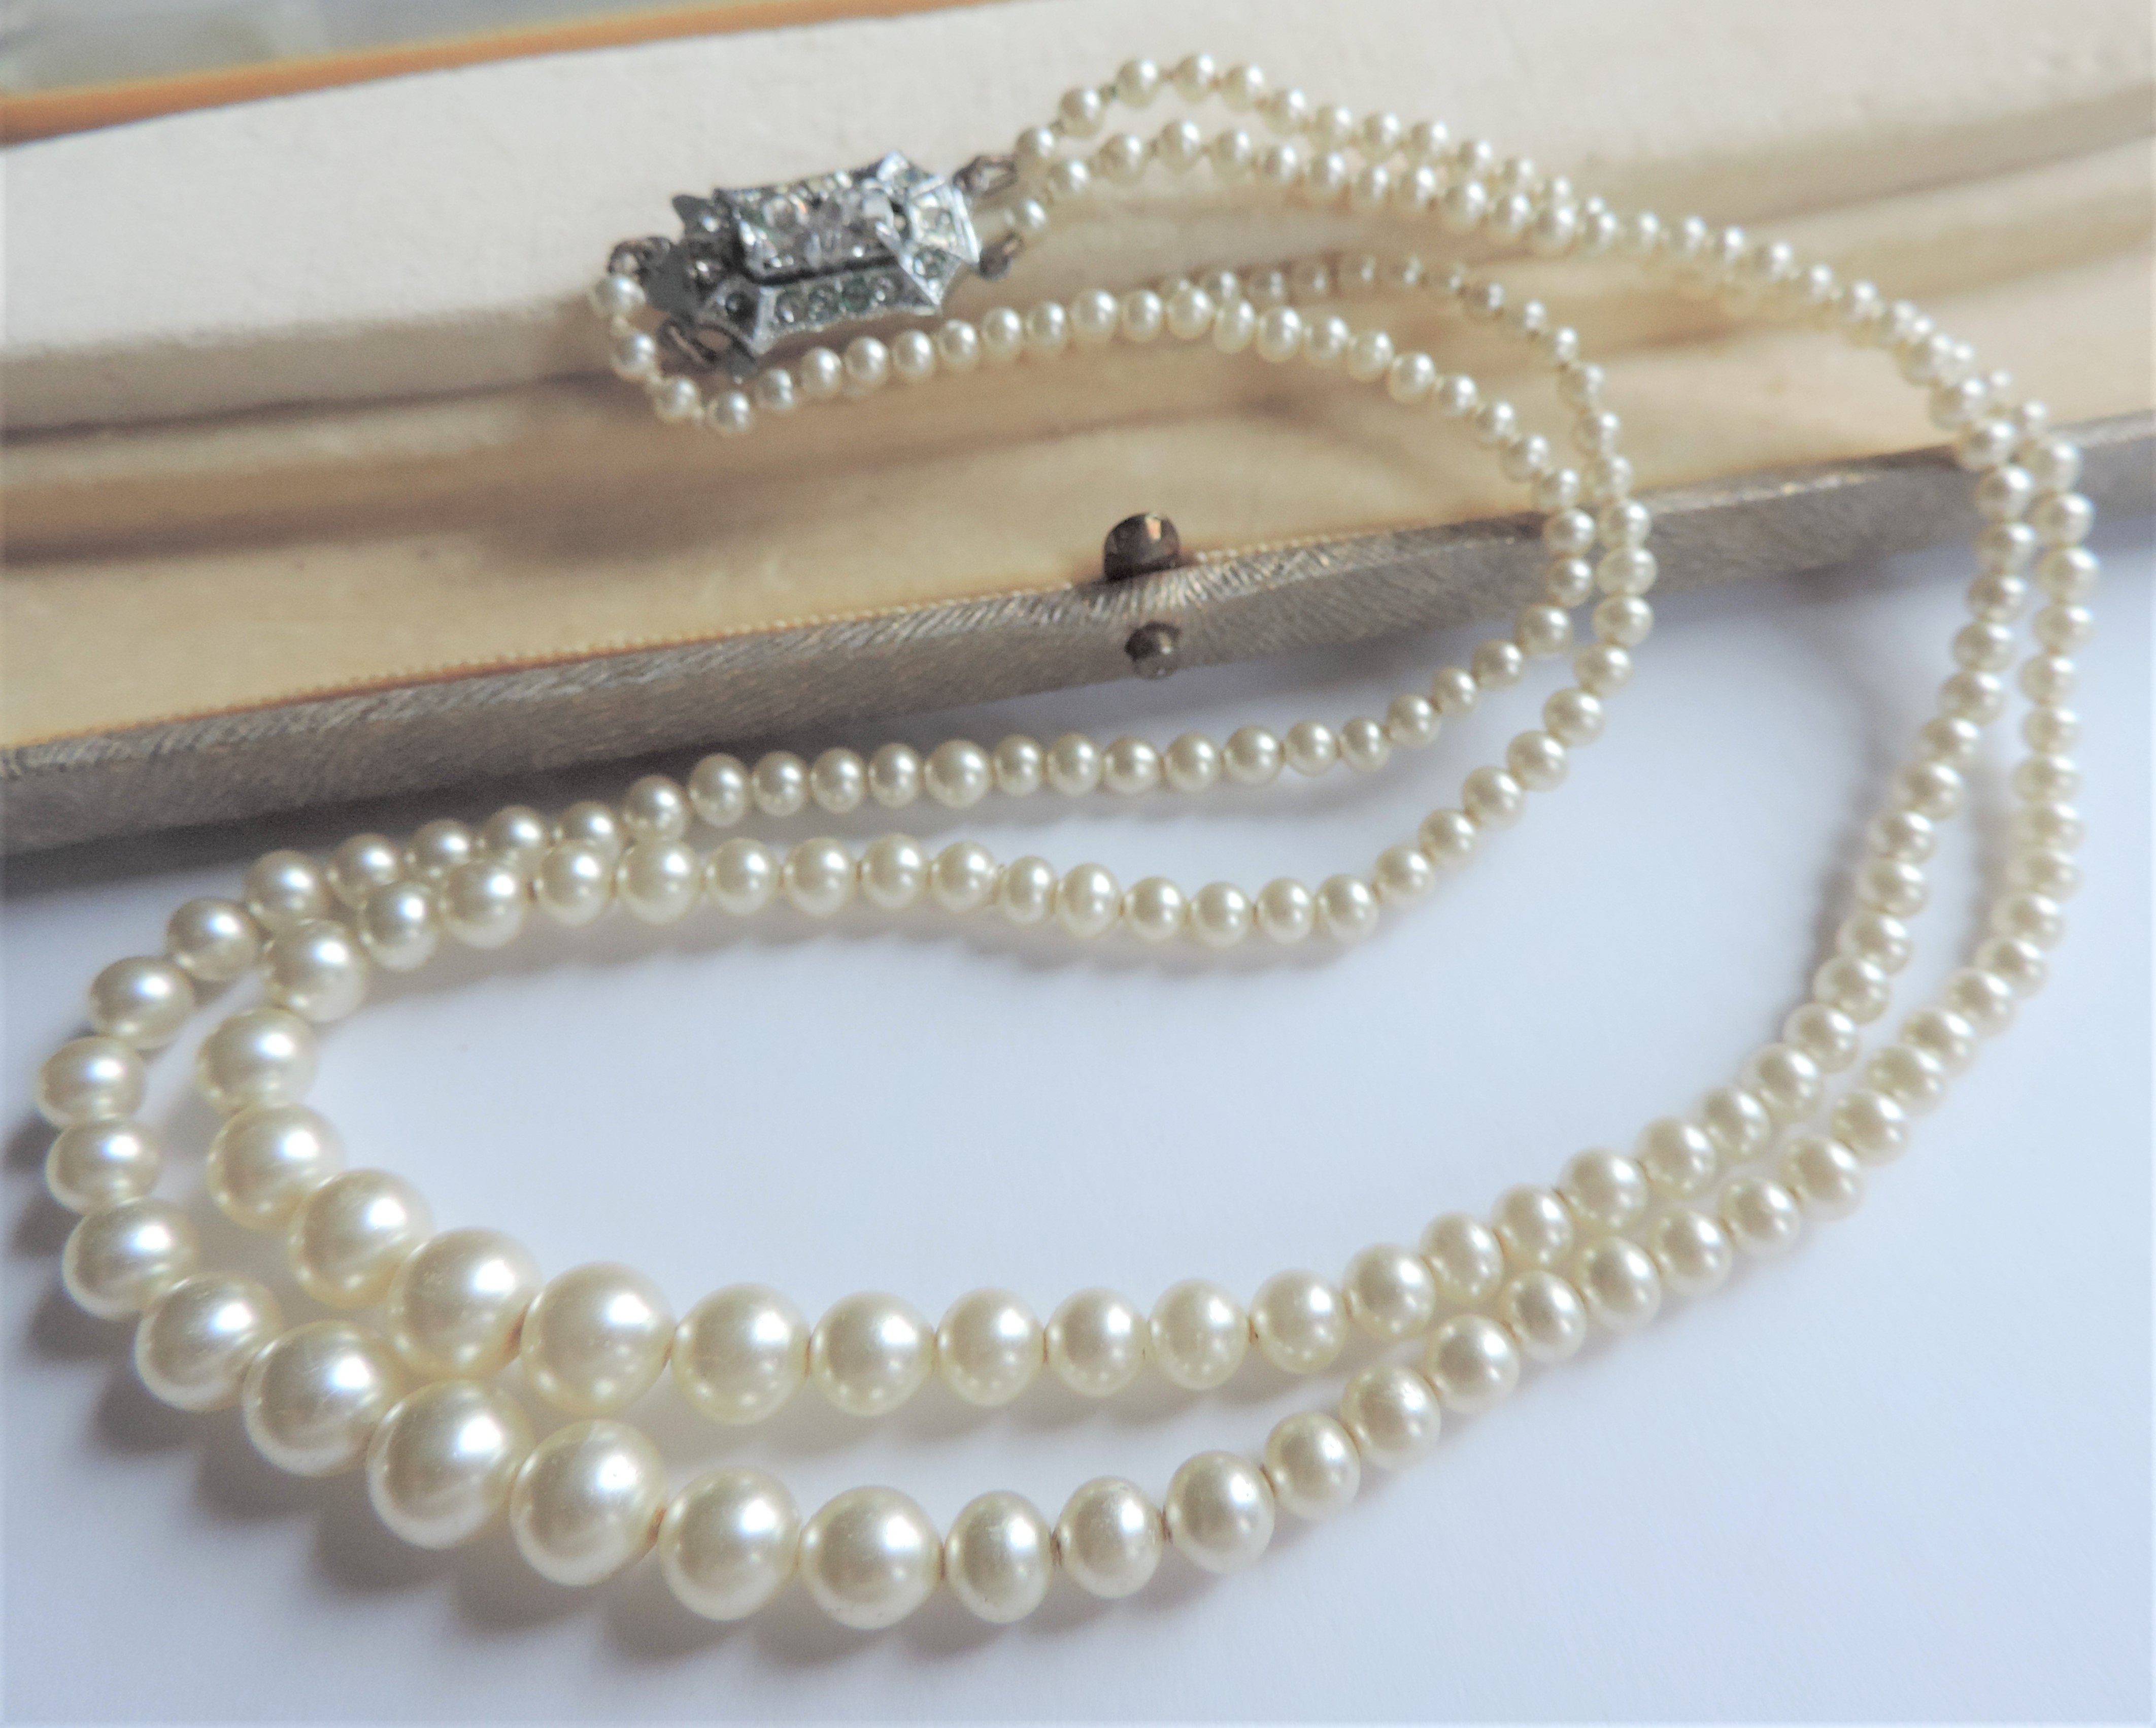 Vintage 16 inch Double Strand Pearl Necklace in Presentation Box - Image 2 of 3